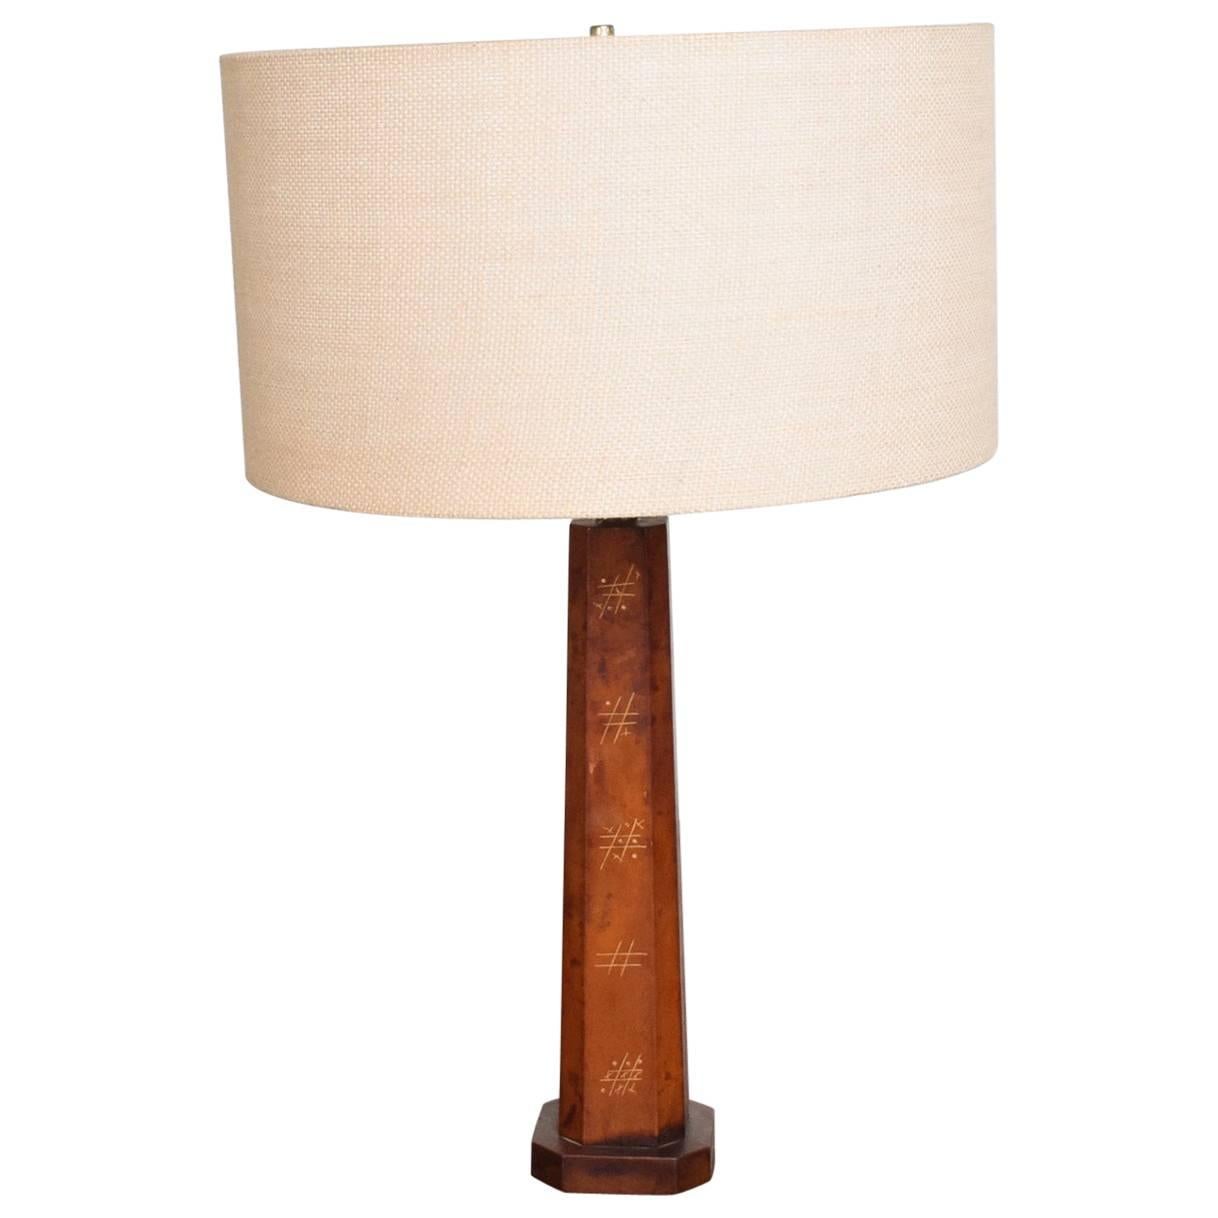 Mexican Modernist Leather Wrapped Table Lamp